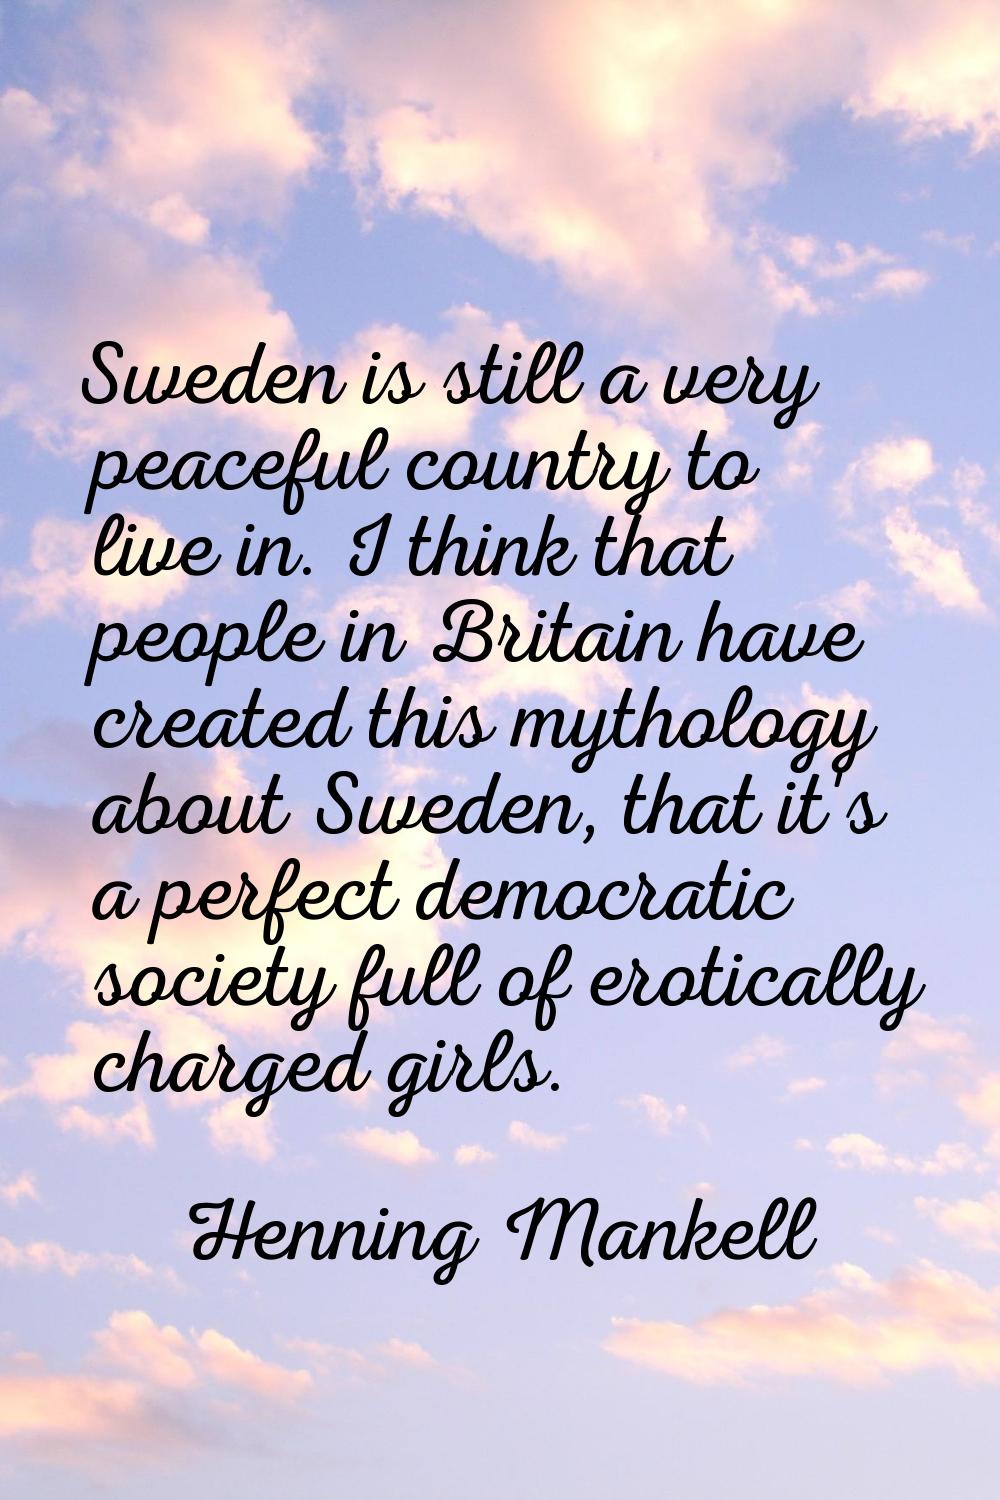 Sweden is still a very peaceful country to live in. I think that people in Britain have created thi